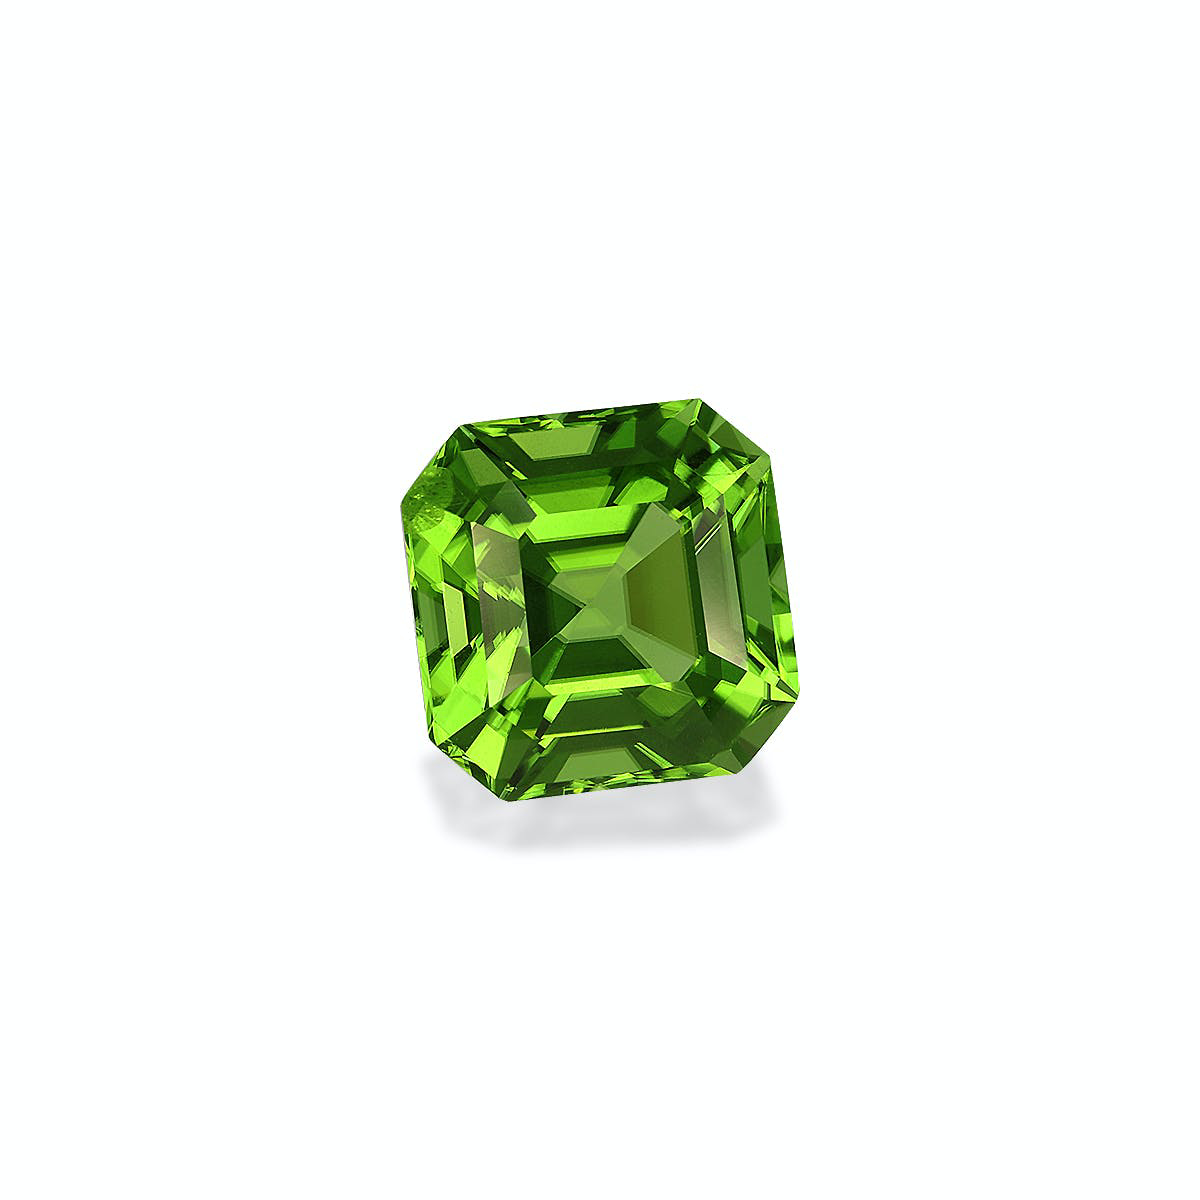 Picture of Vivid Green Peridot 8.27ct - 11mm (PD0348)